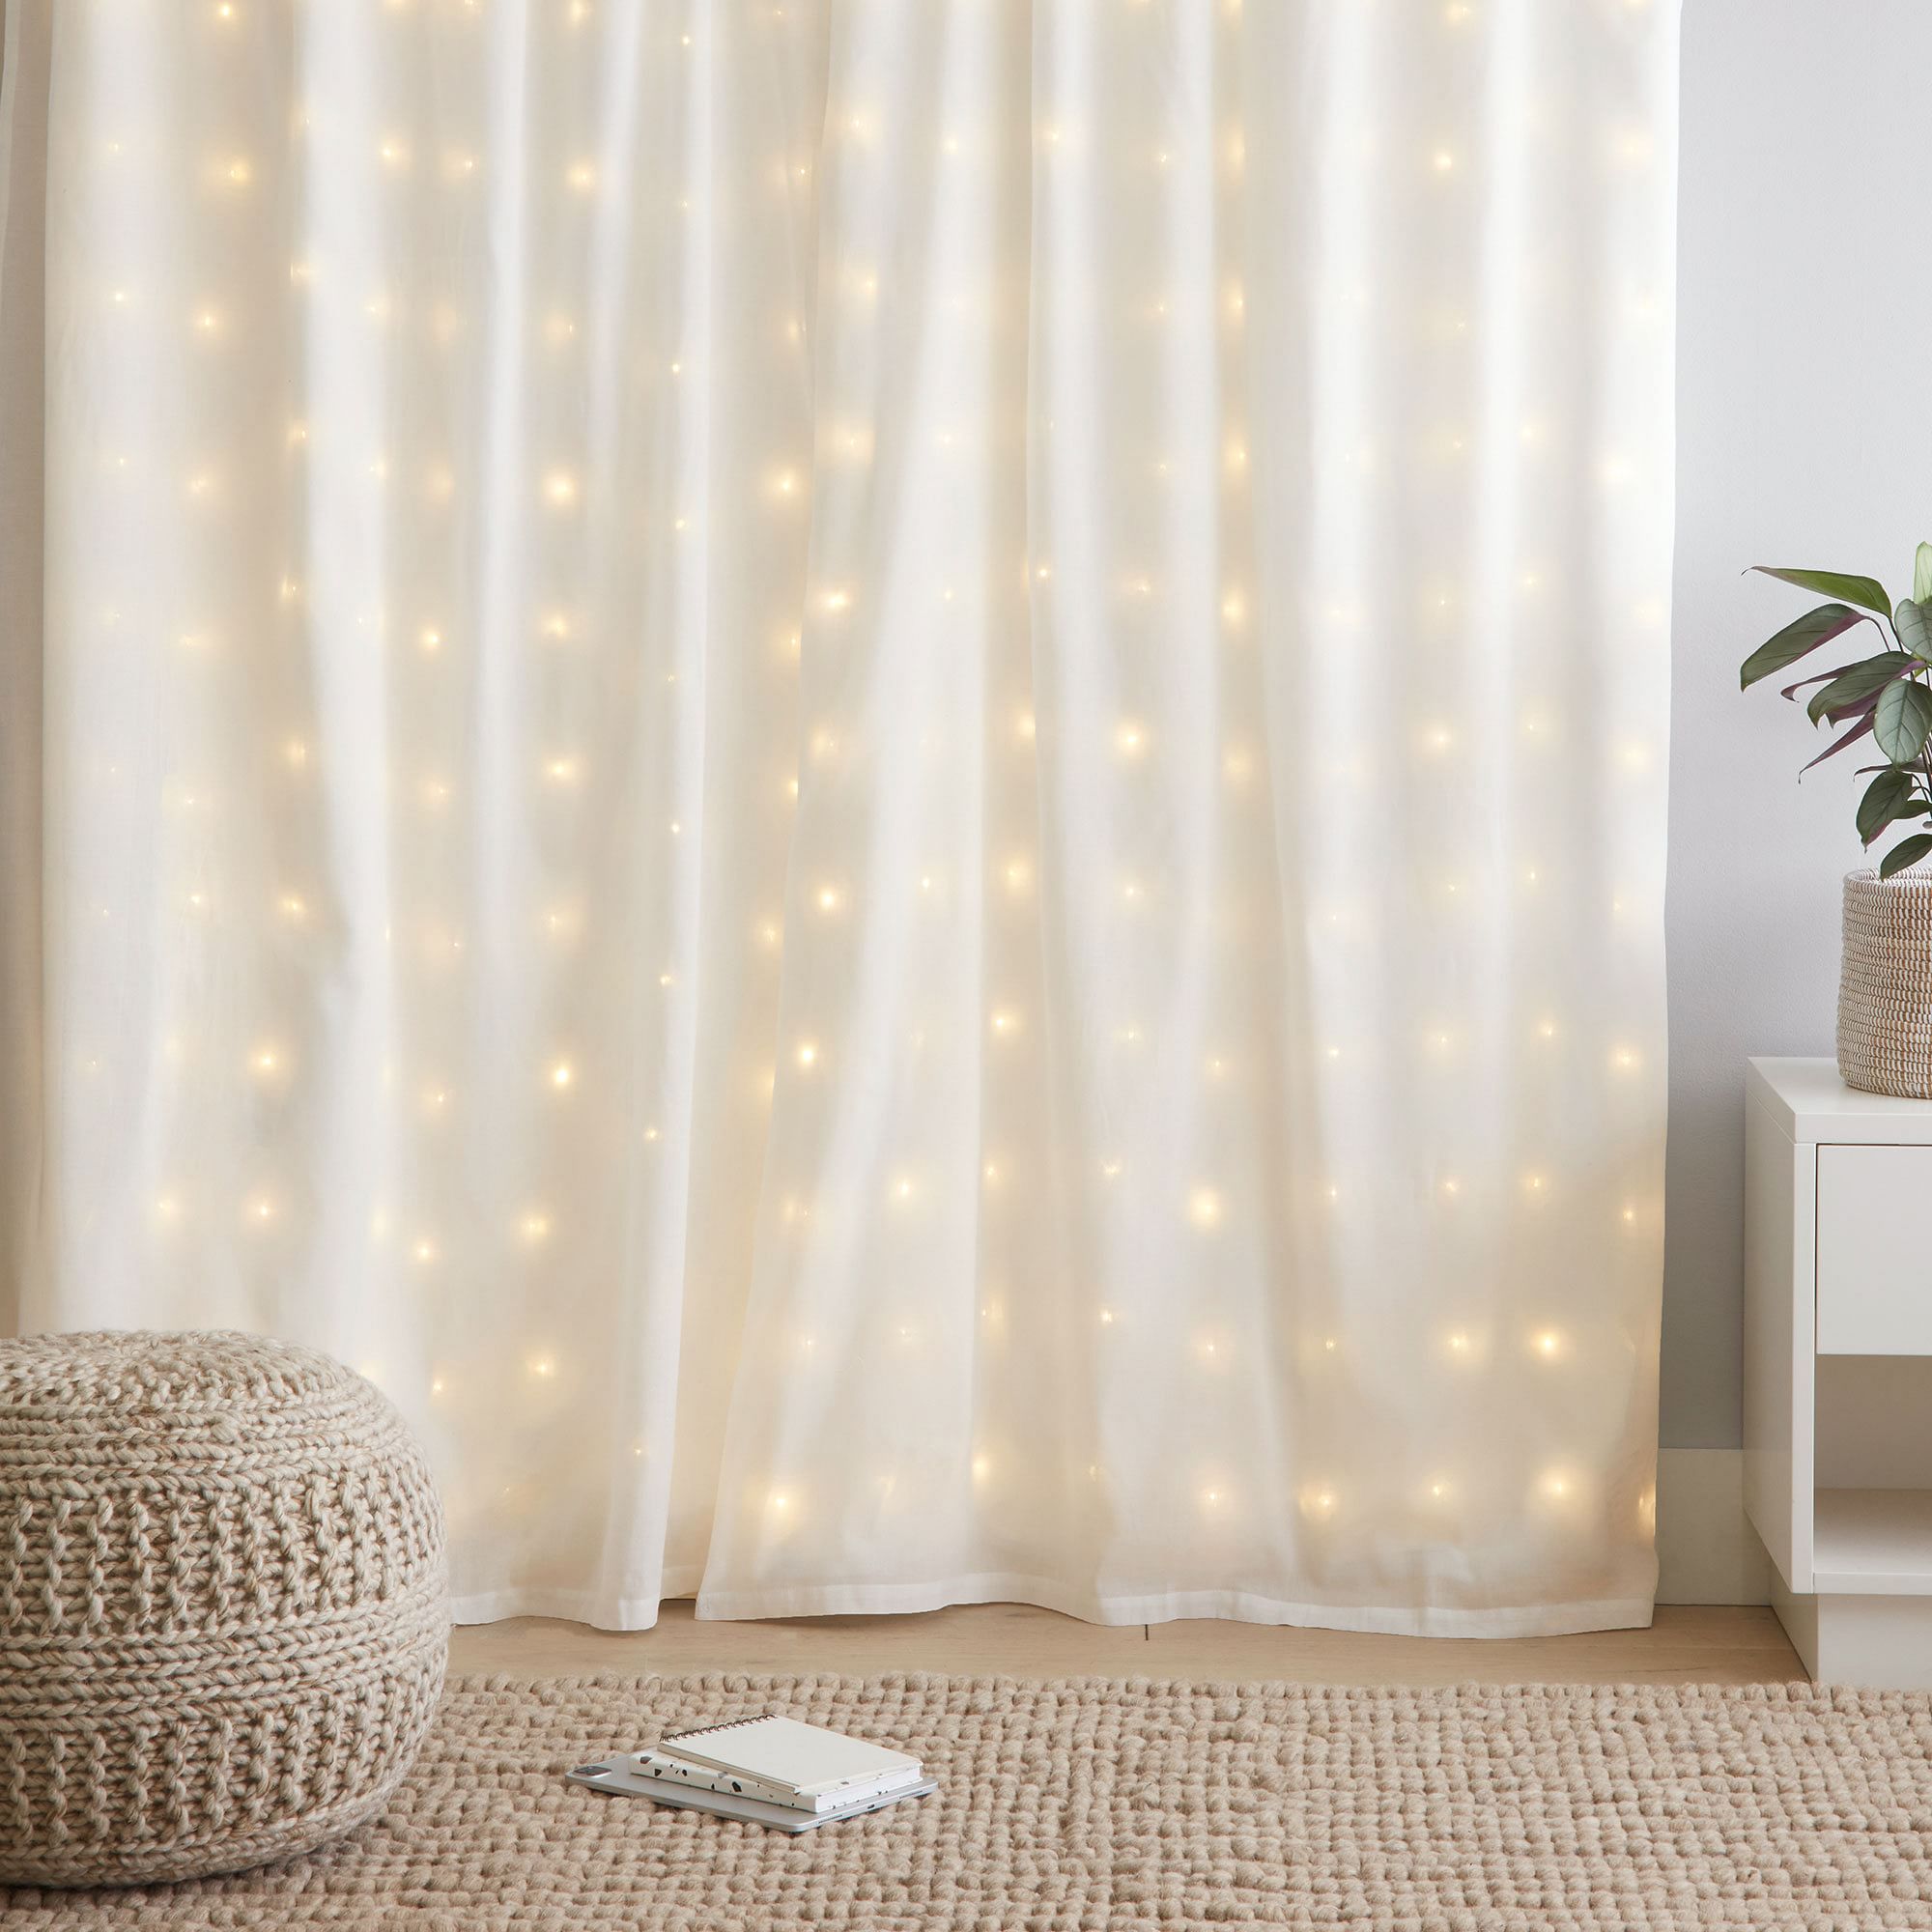 A Fairy Light wall curtain in a bedroom in daylight